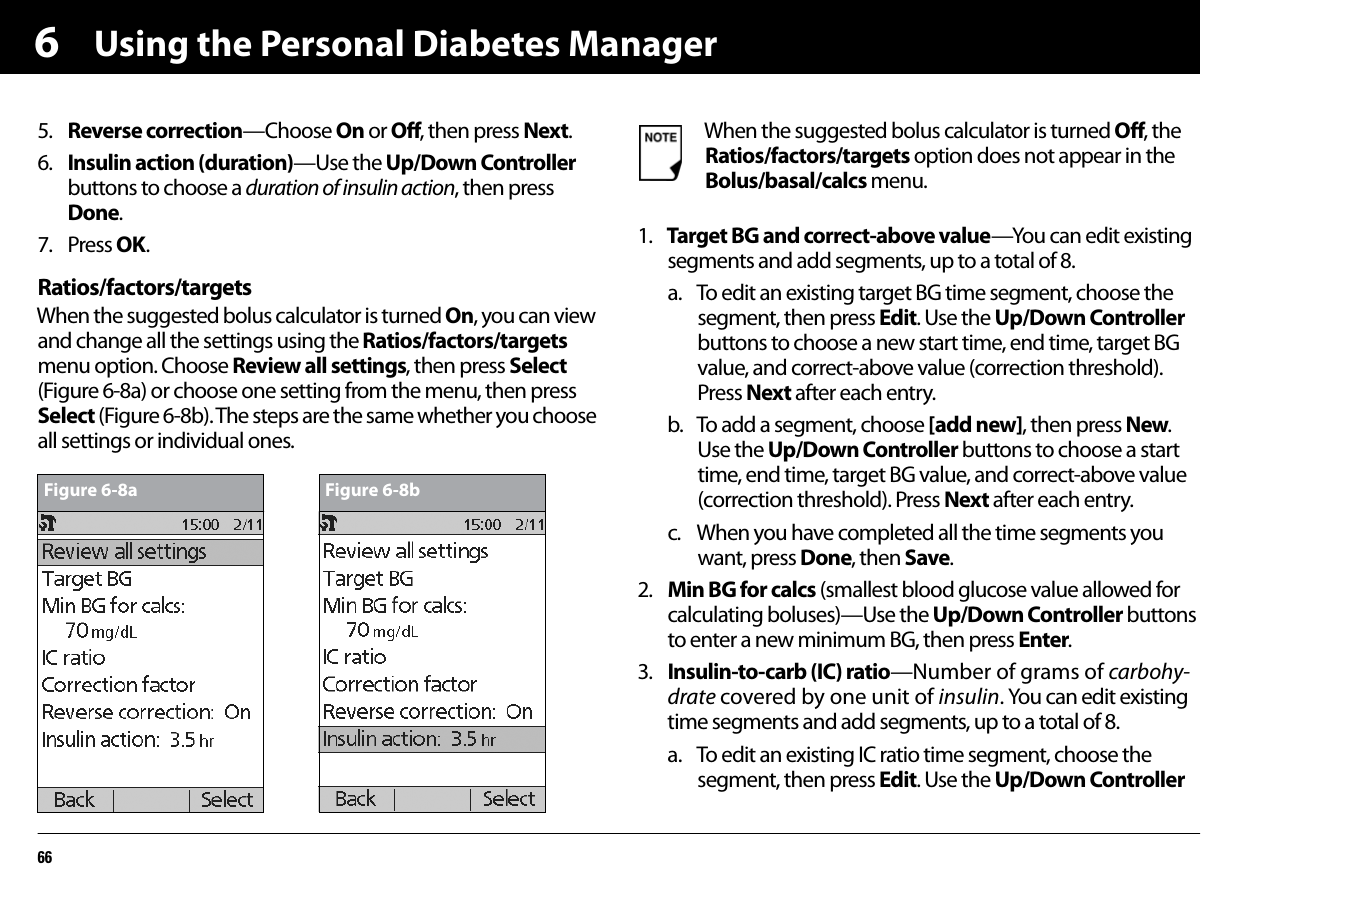 Using the Personal Diabetes Manager6665. Reverse correction—Choose On or Off, then press Next.6. Insulin action (duration)—Use the Up/Down Controller buttons to choose a duration of insulin action, then press Done.7. Press OK.Ratios/factors/targetsWhen the suggested bolus calculator is turned On, you can view and change all the settings using the Ratios/factors/targets menu option. Choose Review all settings, then press Select (Figure 6-8a) or choose one setting from the menu, then press Select (Figure 6-8b). The steps are the same whether you choose all settings or individual ones.1. Target BG and correct-above value—You can edit existing segments and add segments, up to a total of 8.a. To edit an existing target BG time segment, choose the segment, then press Edit. Use the Up/Down Controller buttons to choose a new start time, end time, target BG value, and correct-above value (correction threshold). Press Next after each entry.b. To add a segment, choose [add new], then press New. Use the Up/Down Controller buttons to choose a start time, end time, target BG value, and correct-above value (correction threshold). Press Next after each entry.c. When you have completed all the time segments you want, press Done, then Save.2. Min BG for calcs (smallest blood glucose value allowed for calculating boluses)—Use the Up/Down Controller buttons to enter a new minimum BG, then press Enter.3. Insulin-to-carb (IC) ratio—Number of grams of carbohy-drate covered by one unit of insulin. You can edit existing time segments and add segments, up to a total of 8.a. To edit an existing IC ratio time segment, choose the segment, then press Edit. Use the Up/Down Controller Figure 6-8a Figure 6-8bWhen the suggested bolus calculator is turned Off, the Ratios/factors/targets option does not appear in the Bolus/basal/calcs menu.